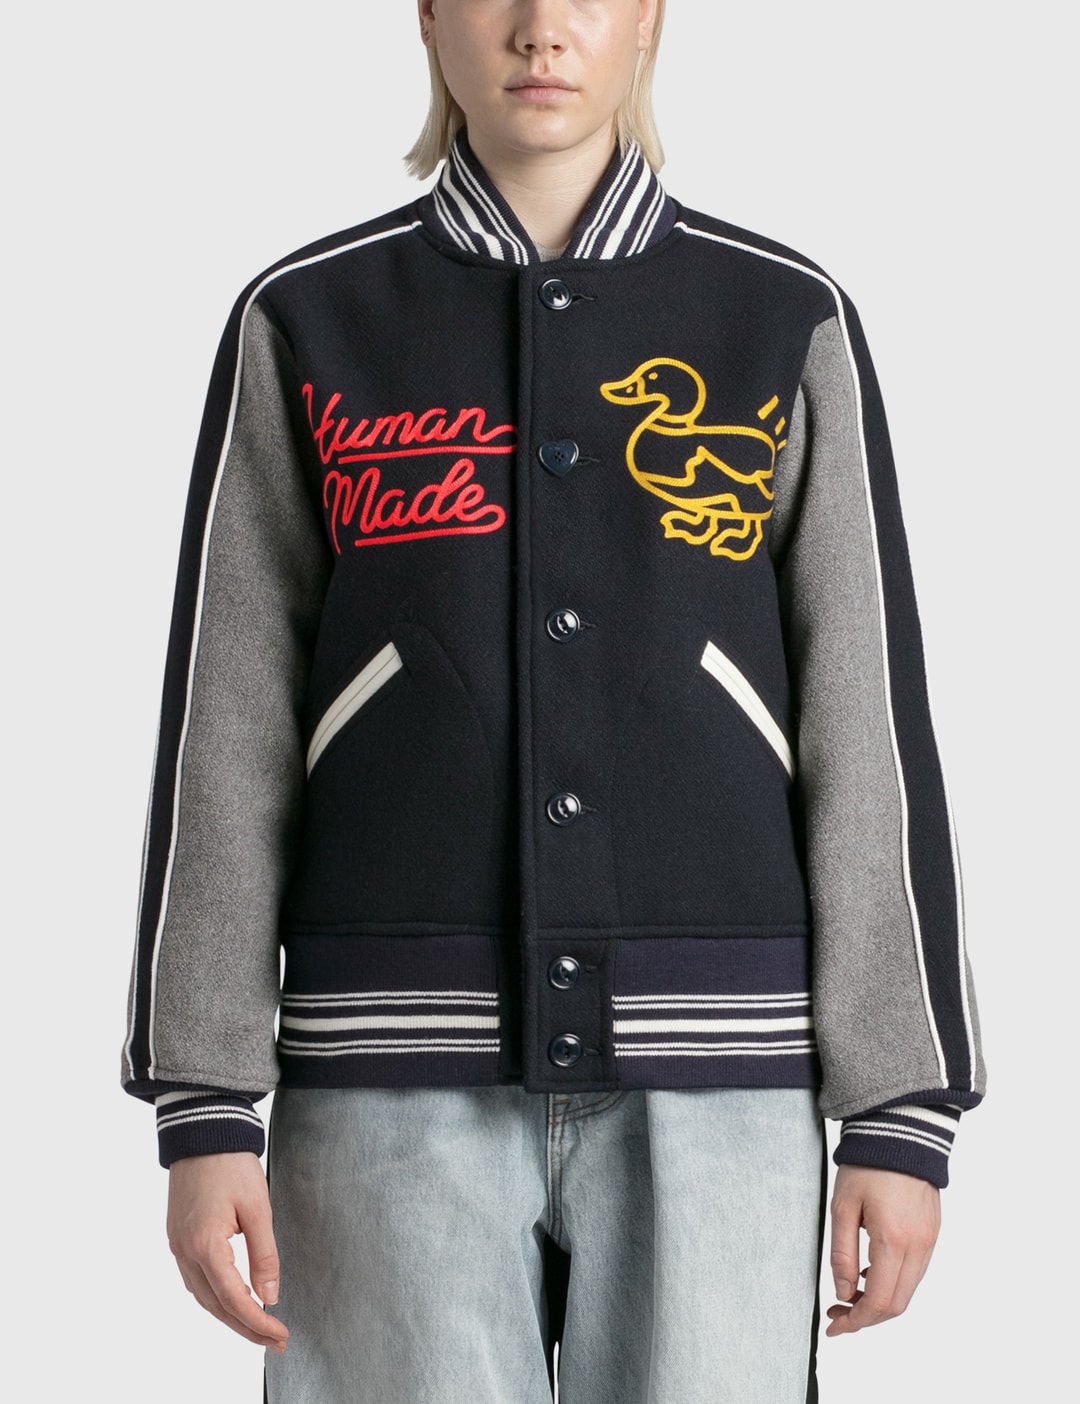 Human Made - One By Penfolds Varsity Jacket #1  HBX - Globally Curated  Fashion and Lifestyle by Hypebeast